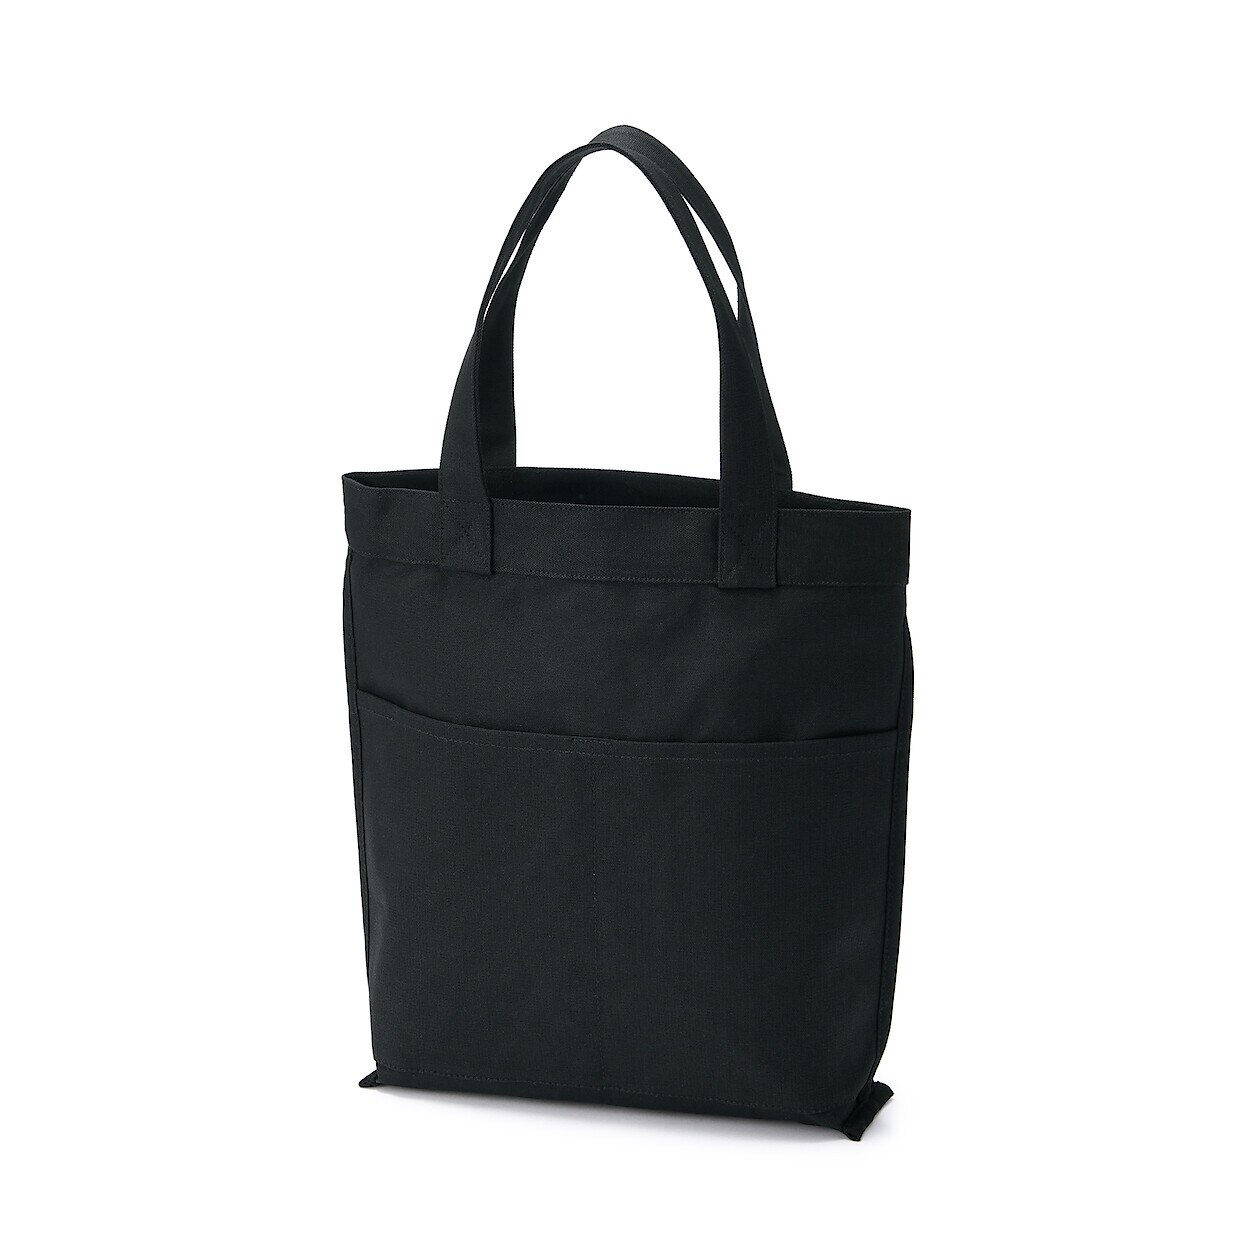 Handled Natural Cotton Shopping Bags, Capacity: 5 Kg, Size: 37 X 41 cm